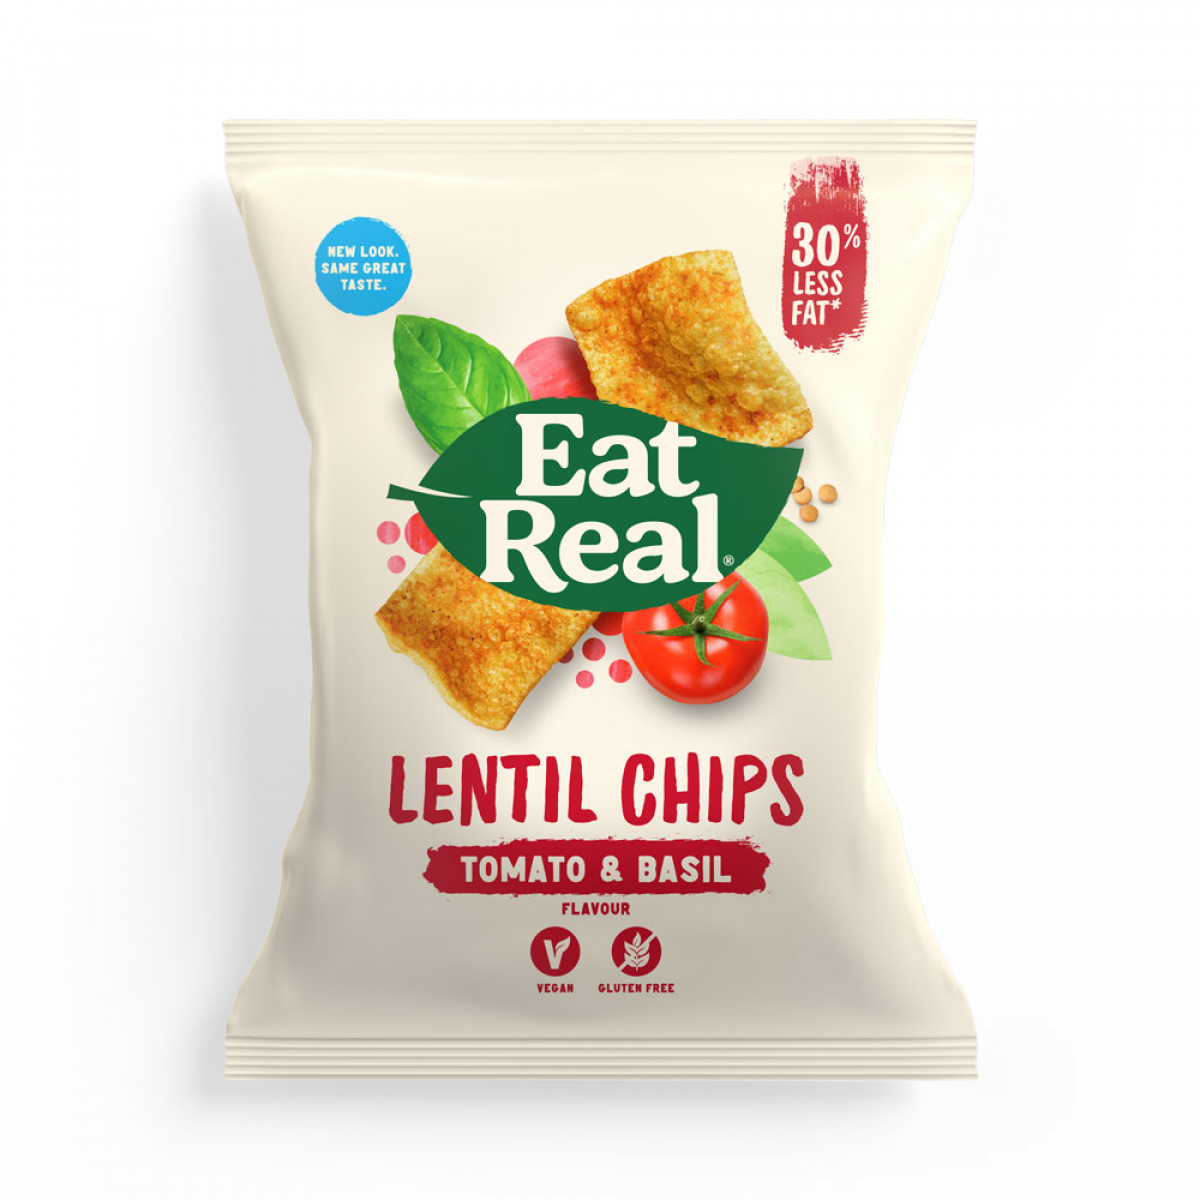 Product picture for Lentil Chips Tomato & Basil